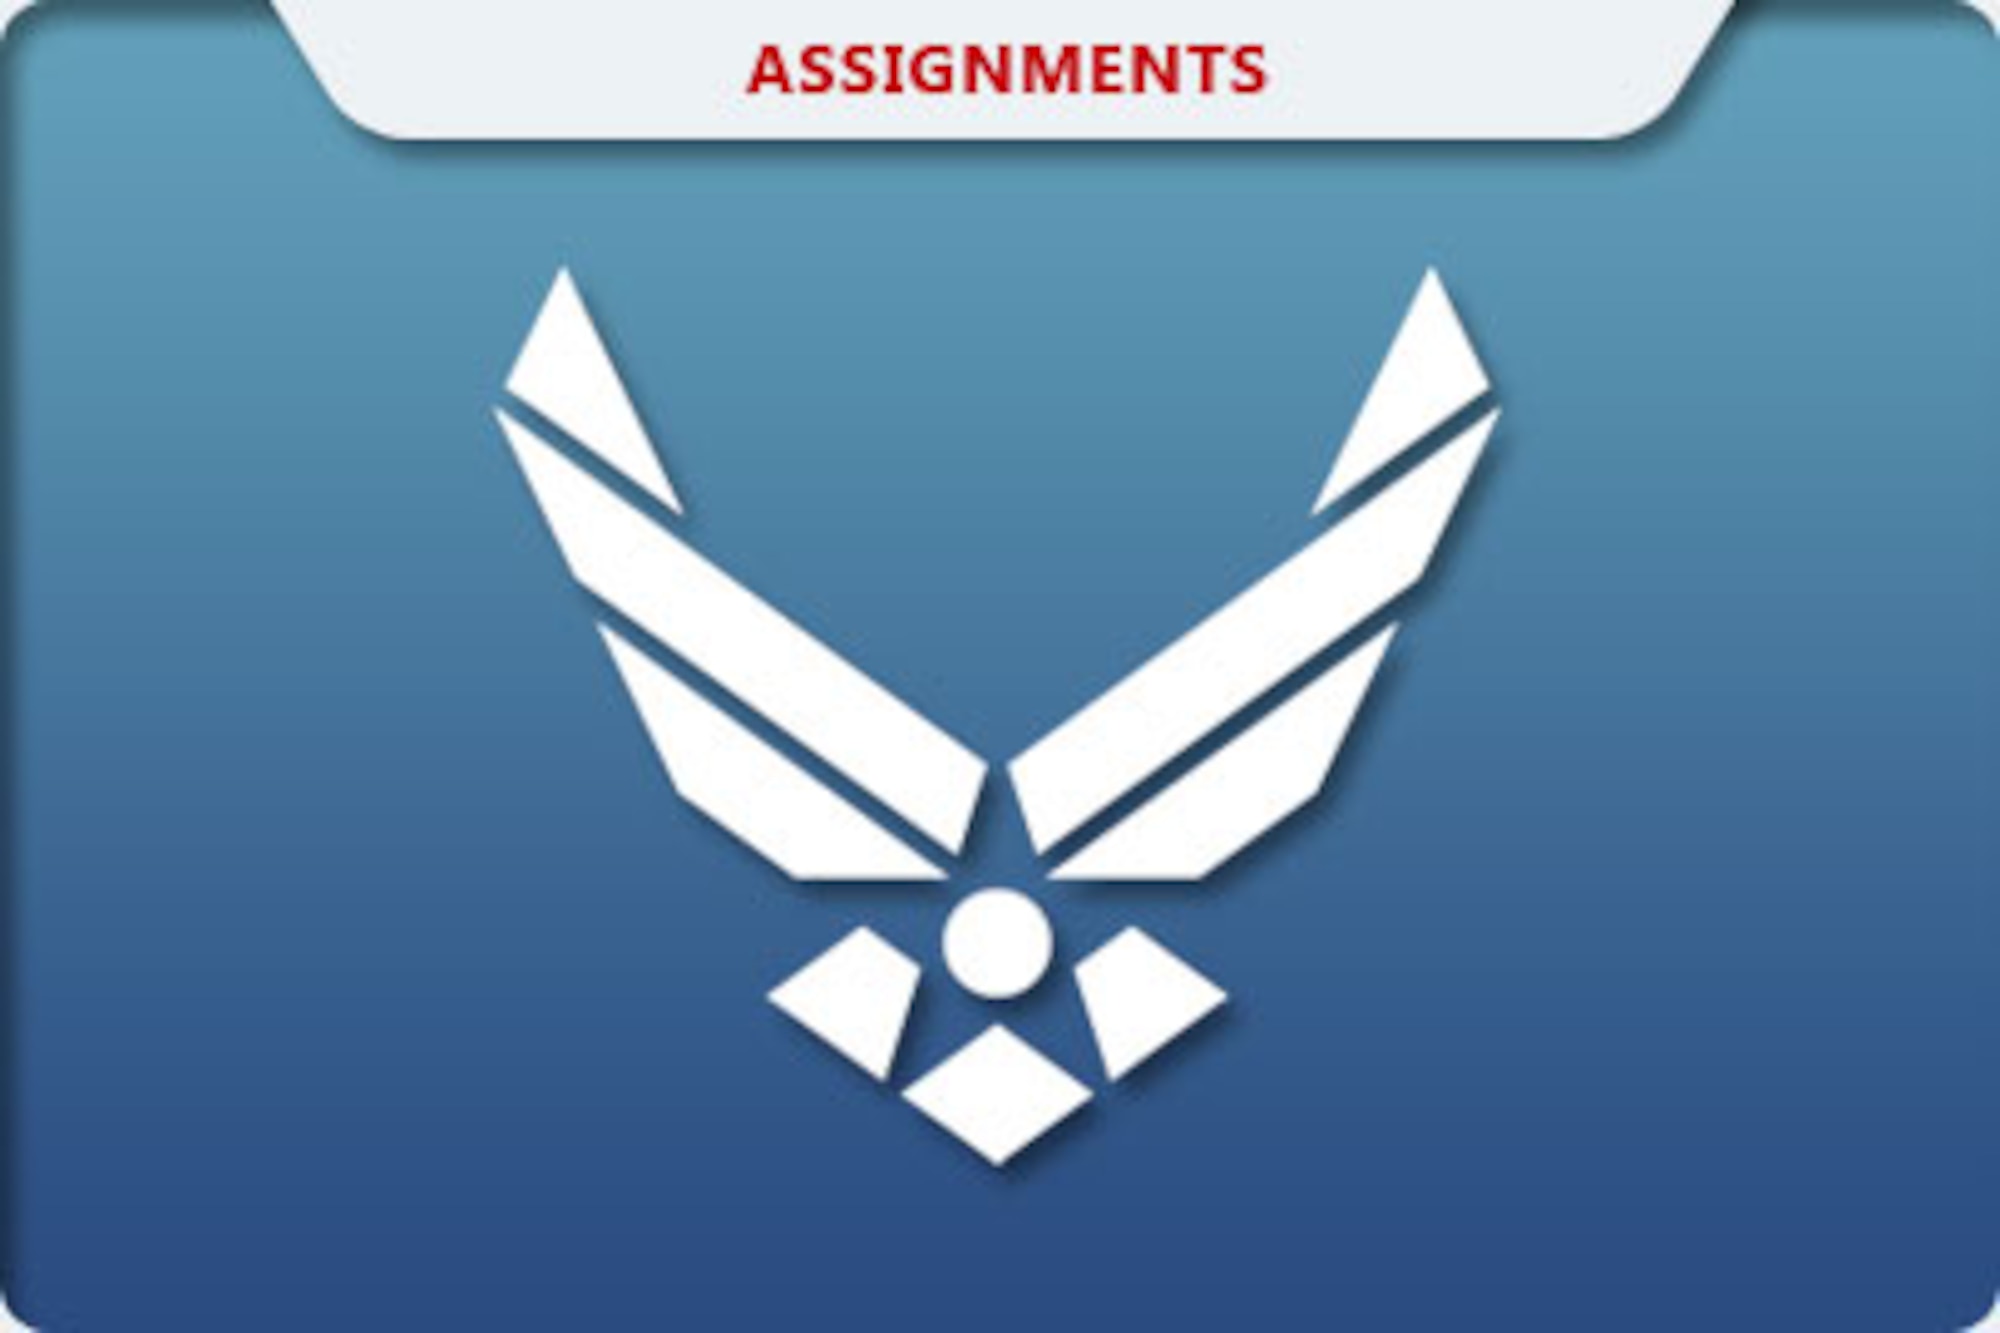 For the last few years, I've had the privilege of serving as a functional manager for enlisted communications assignments. When I first arrived, I questioned our assignment policies all the time. However, as I became aware of the reasons each rule was developed, and the consequences of not following them, I quickly came to appreciate them. Our current assignments system may not be perfect, but it is truly based on fairness and equity.